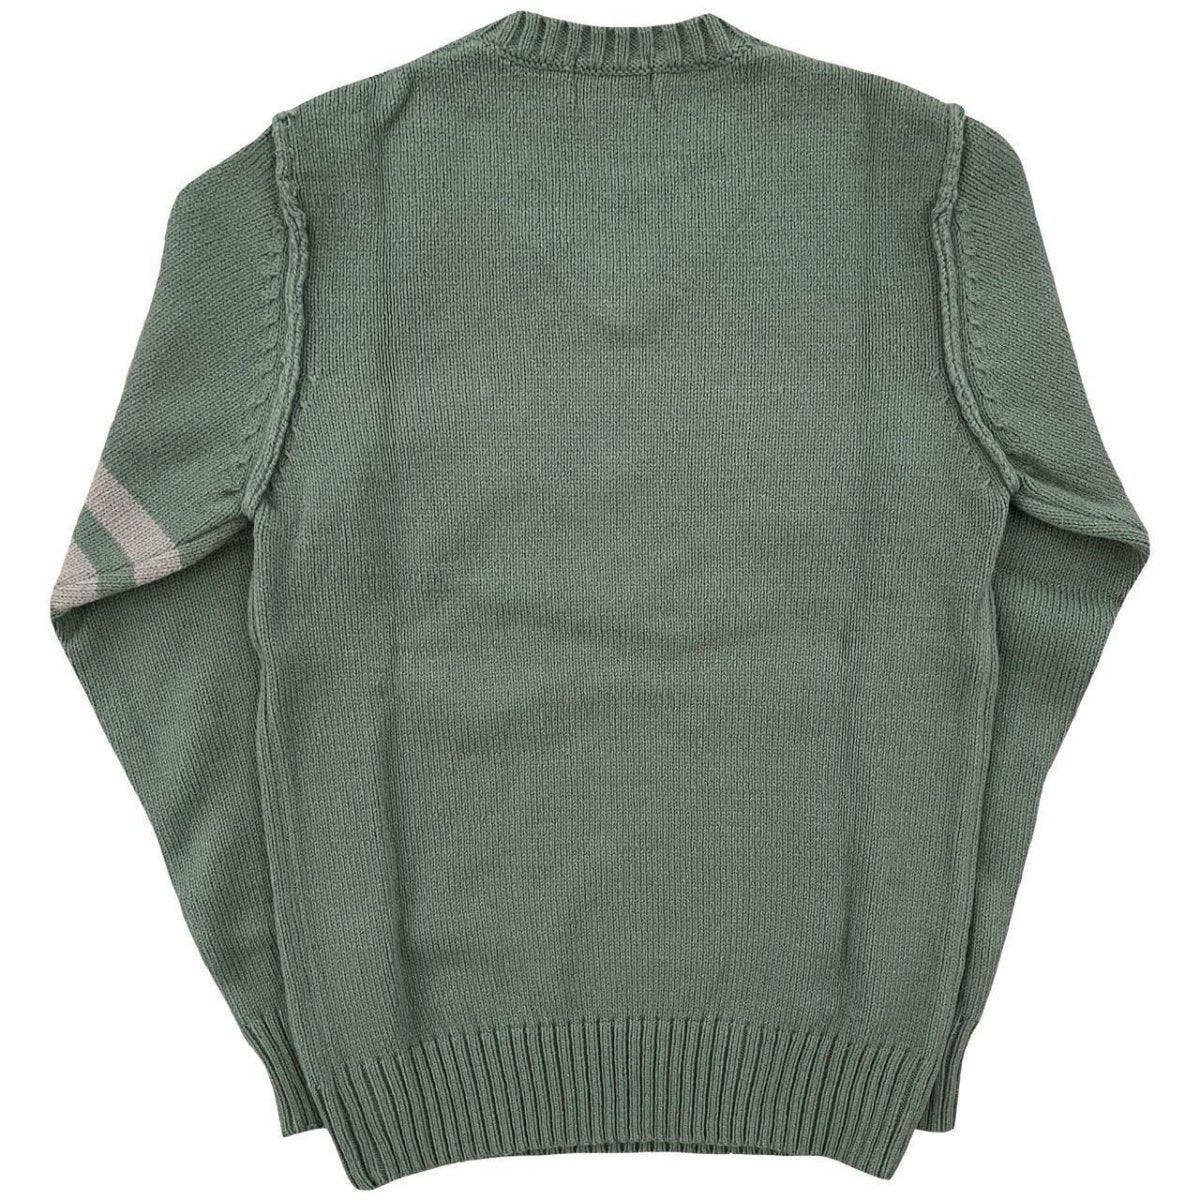 291295 = Homme Sweater - Known Source